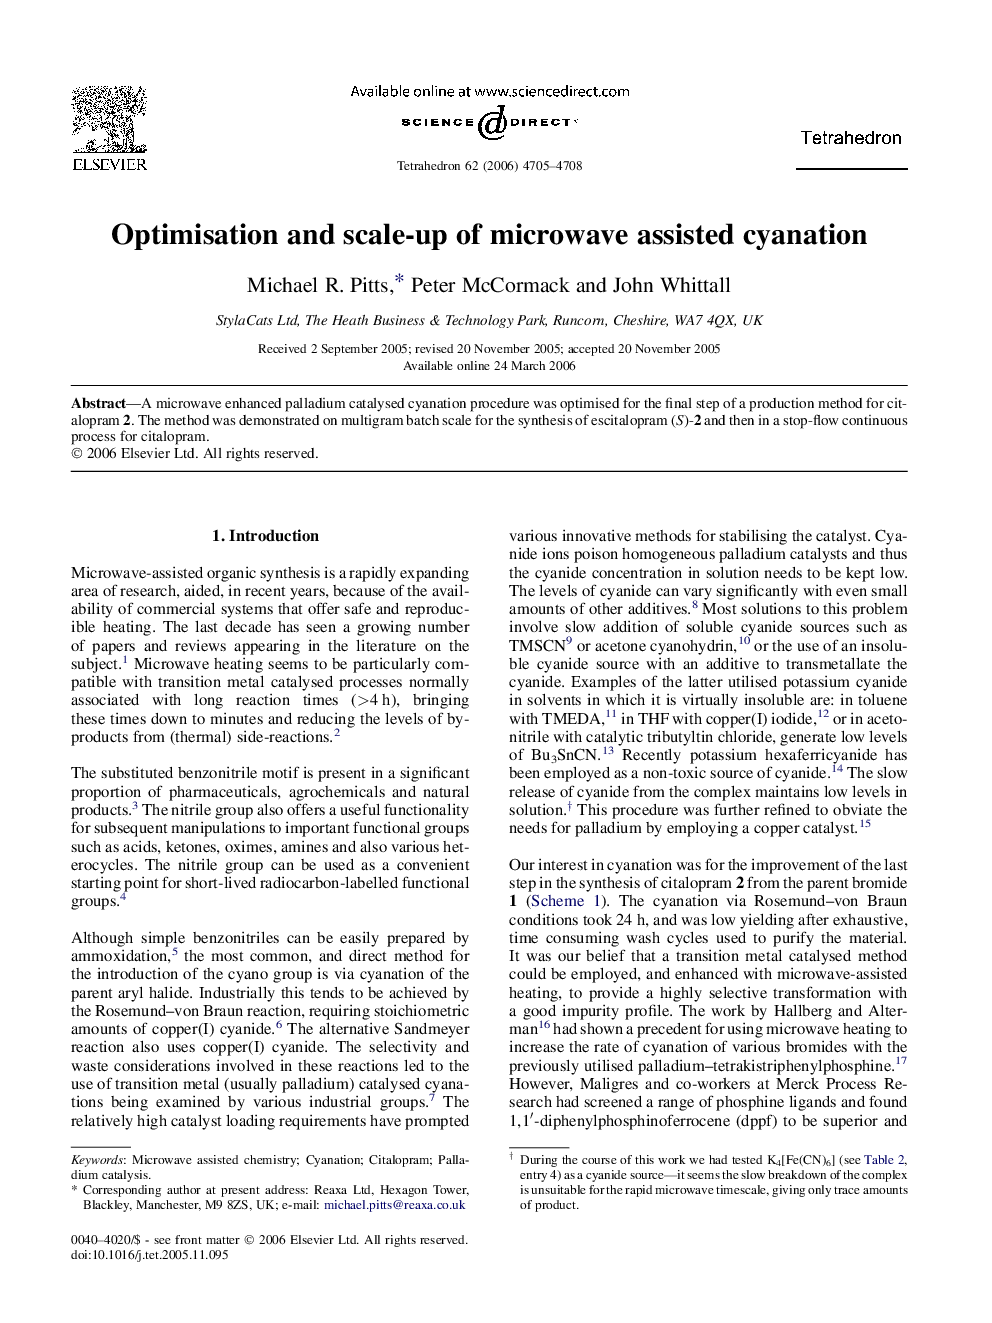 Optimisation and scale-up of microwave assisted cyanation